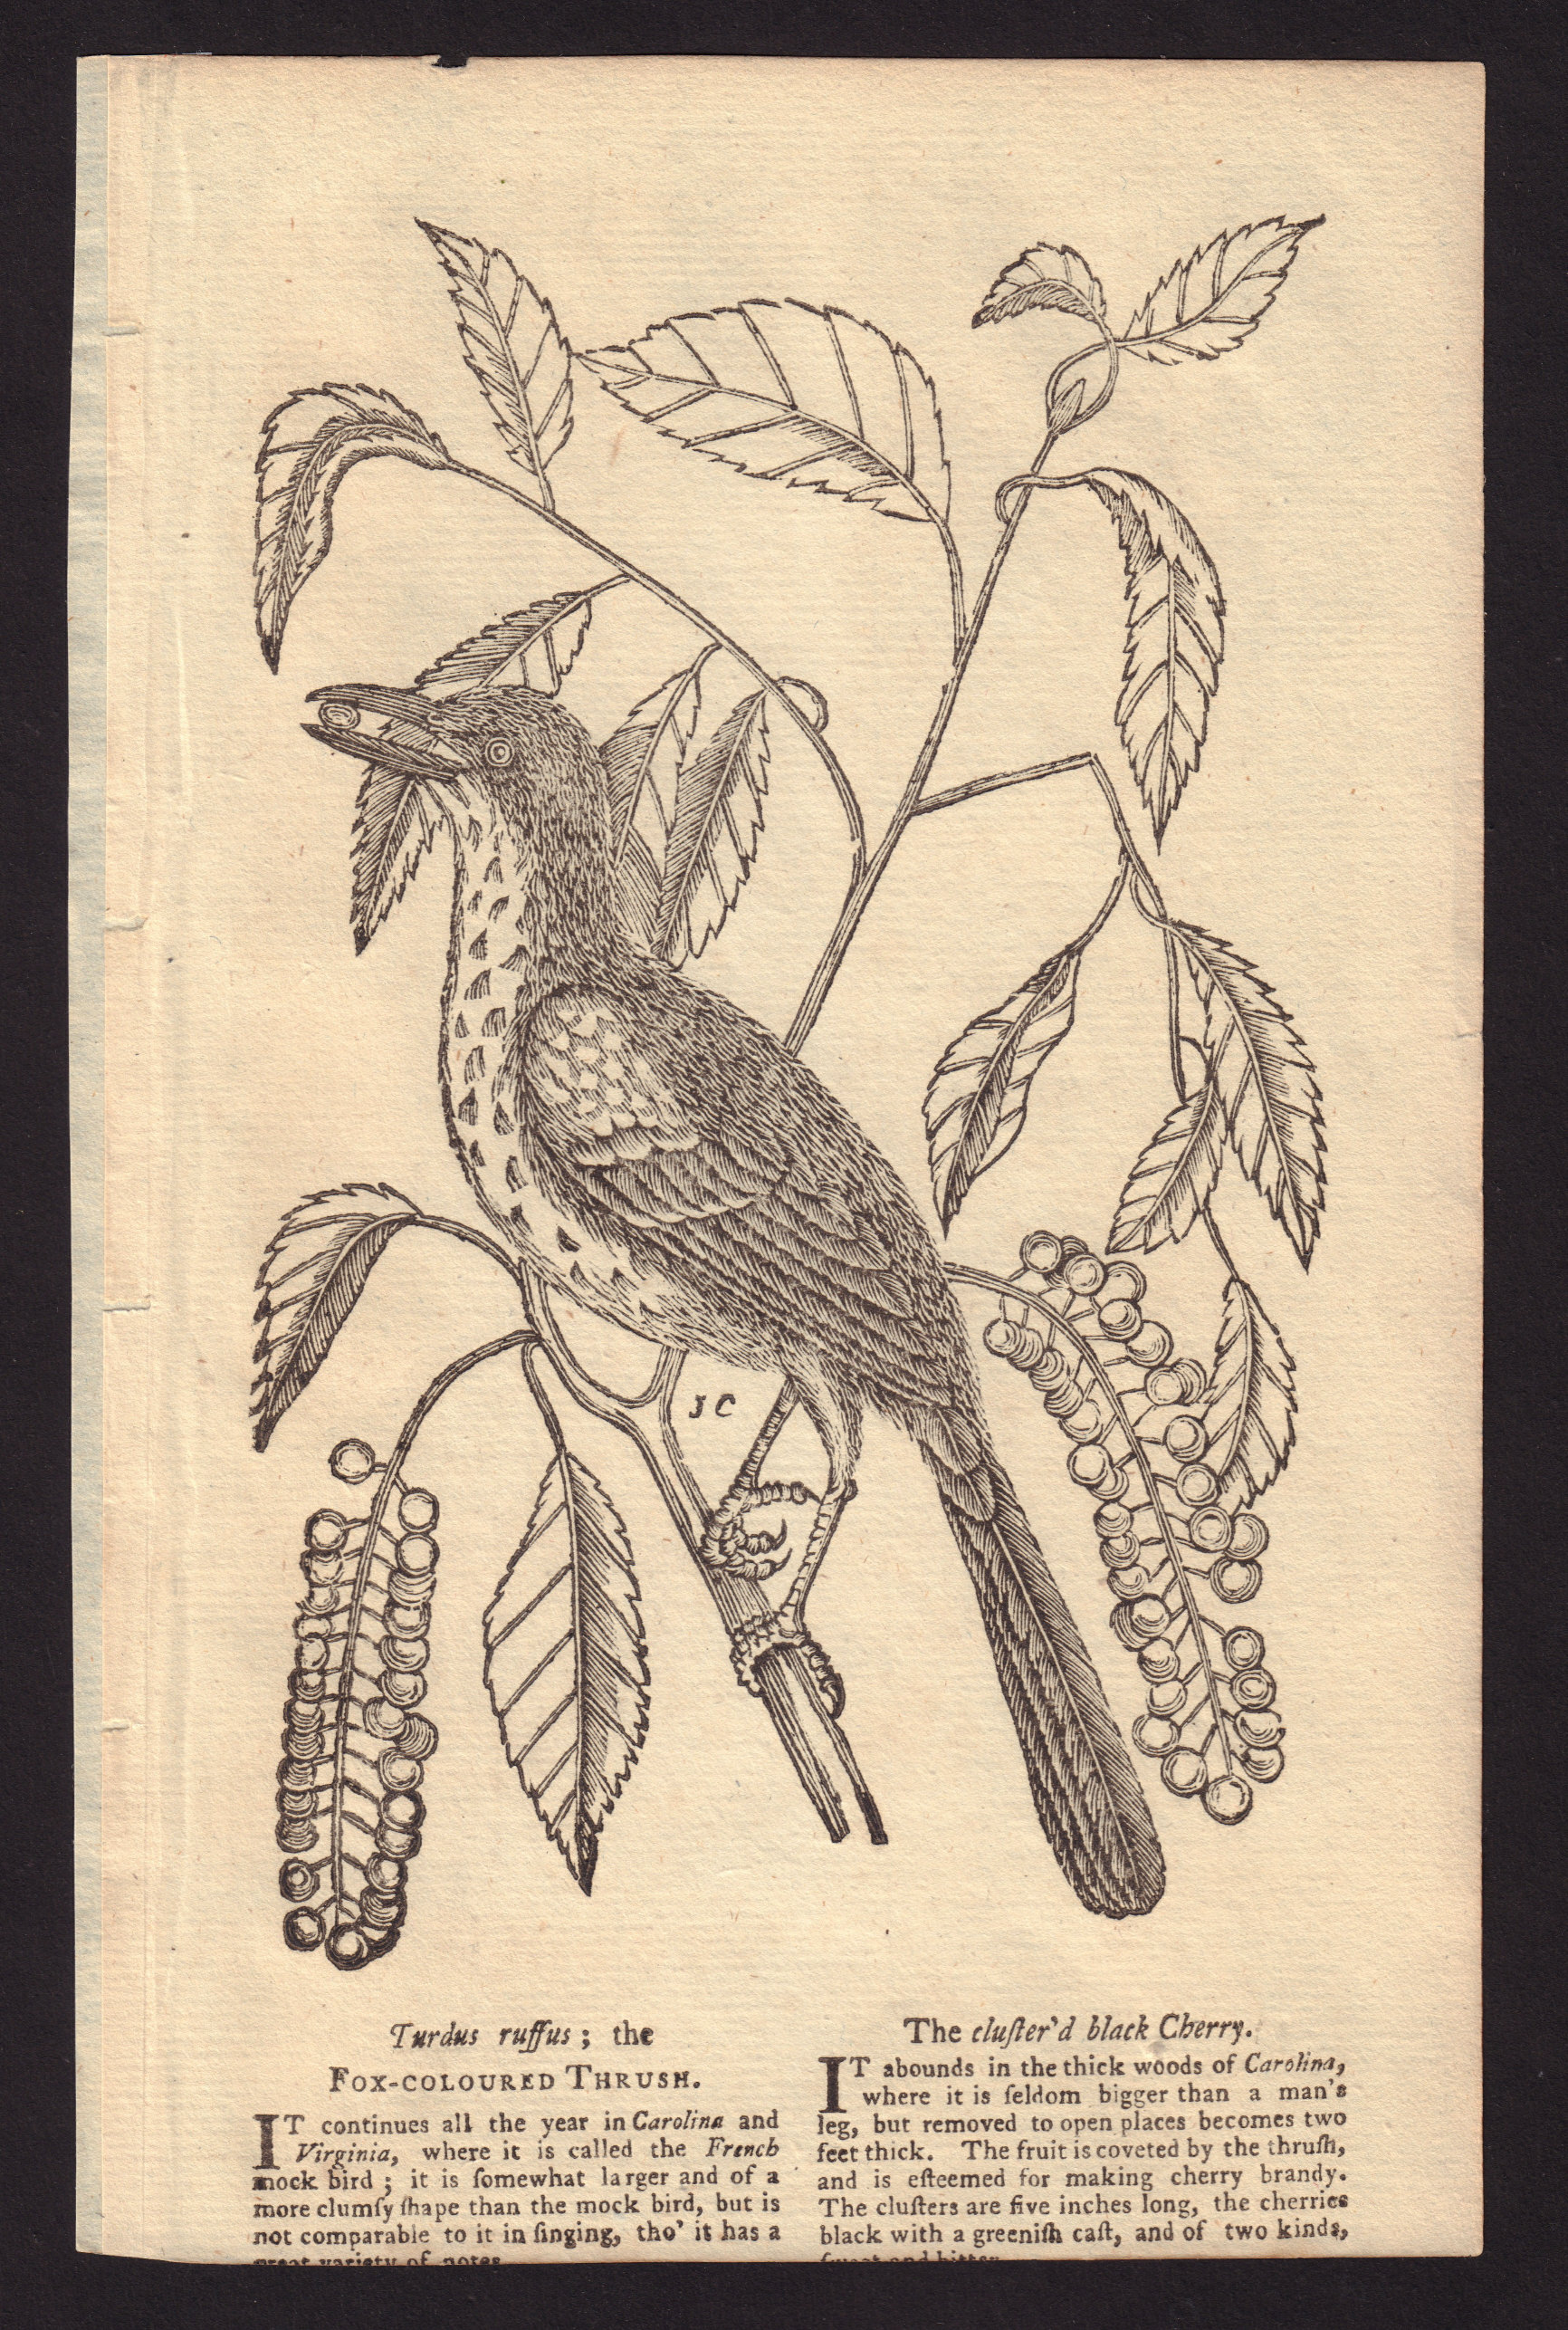 The Fox Coloured Thrush and the clustered black cherry. GENTS MAG 1752 print